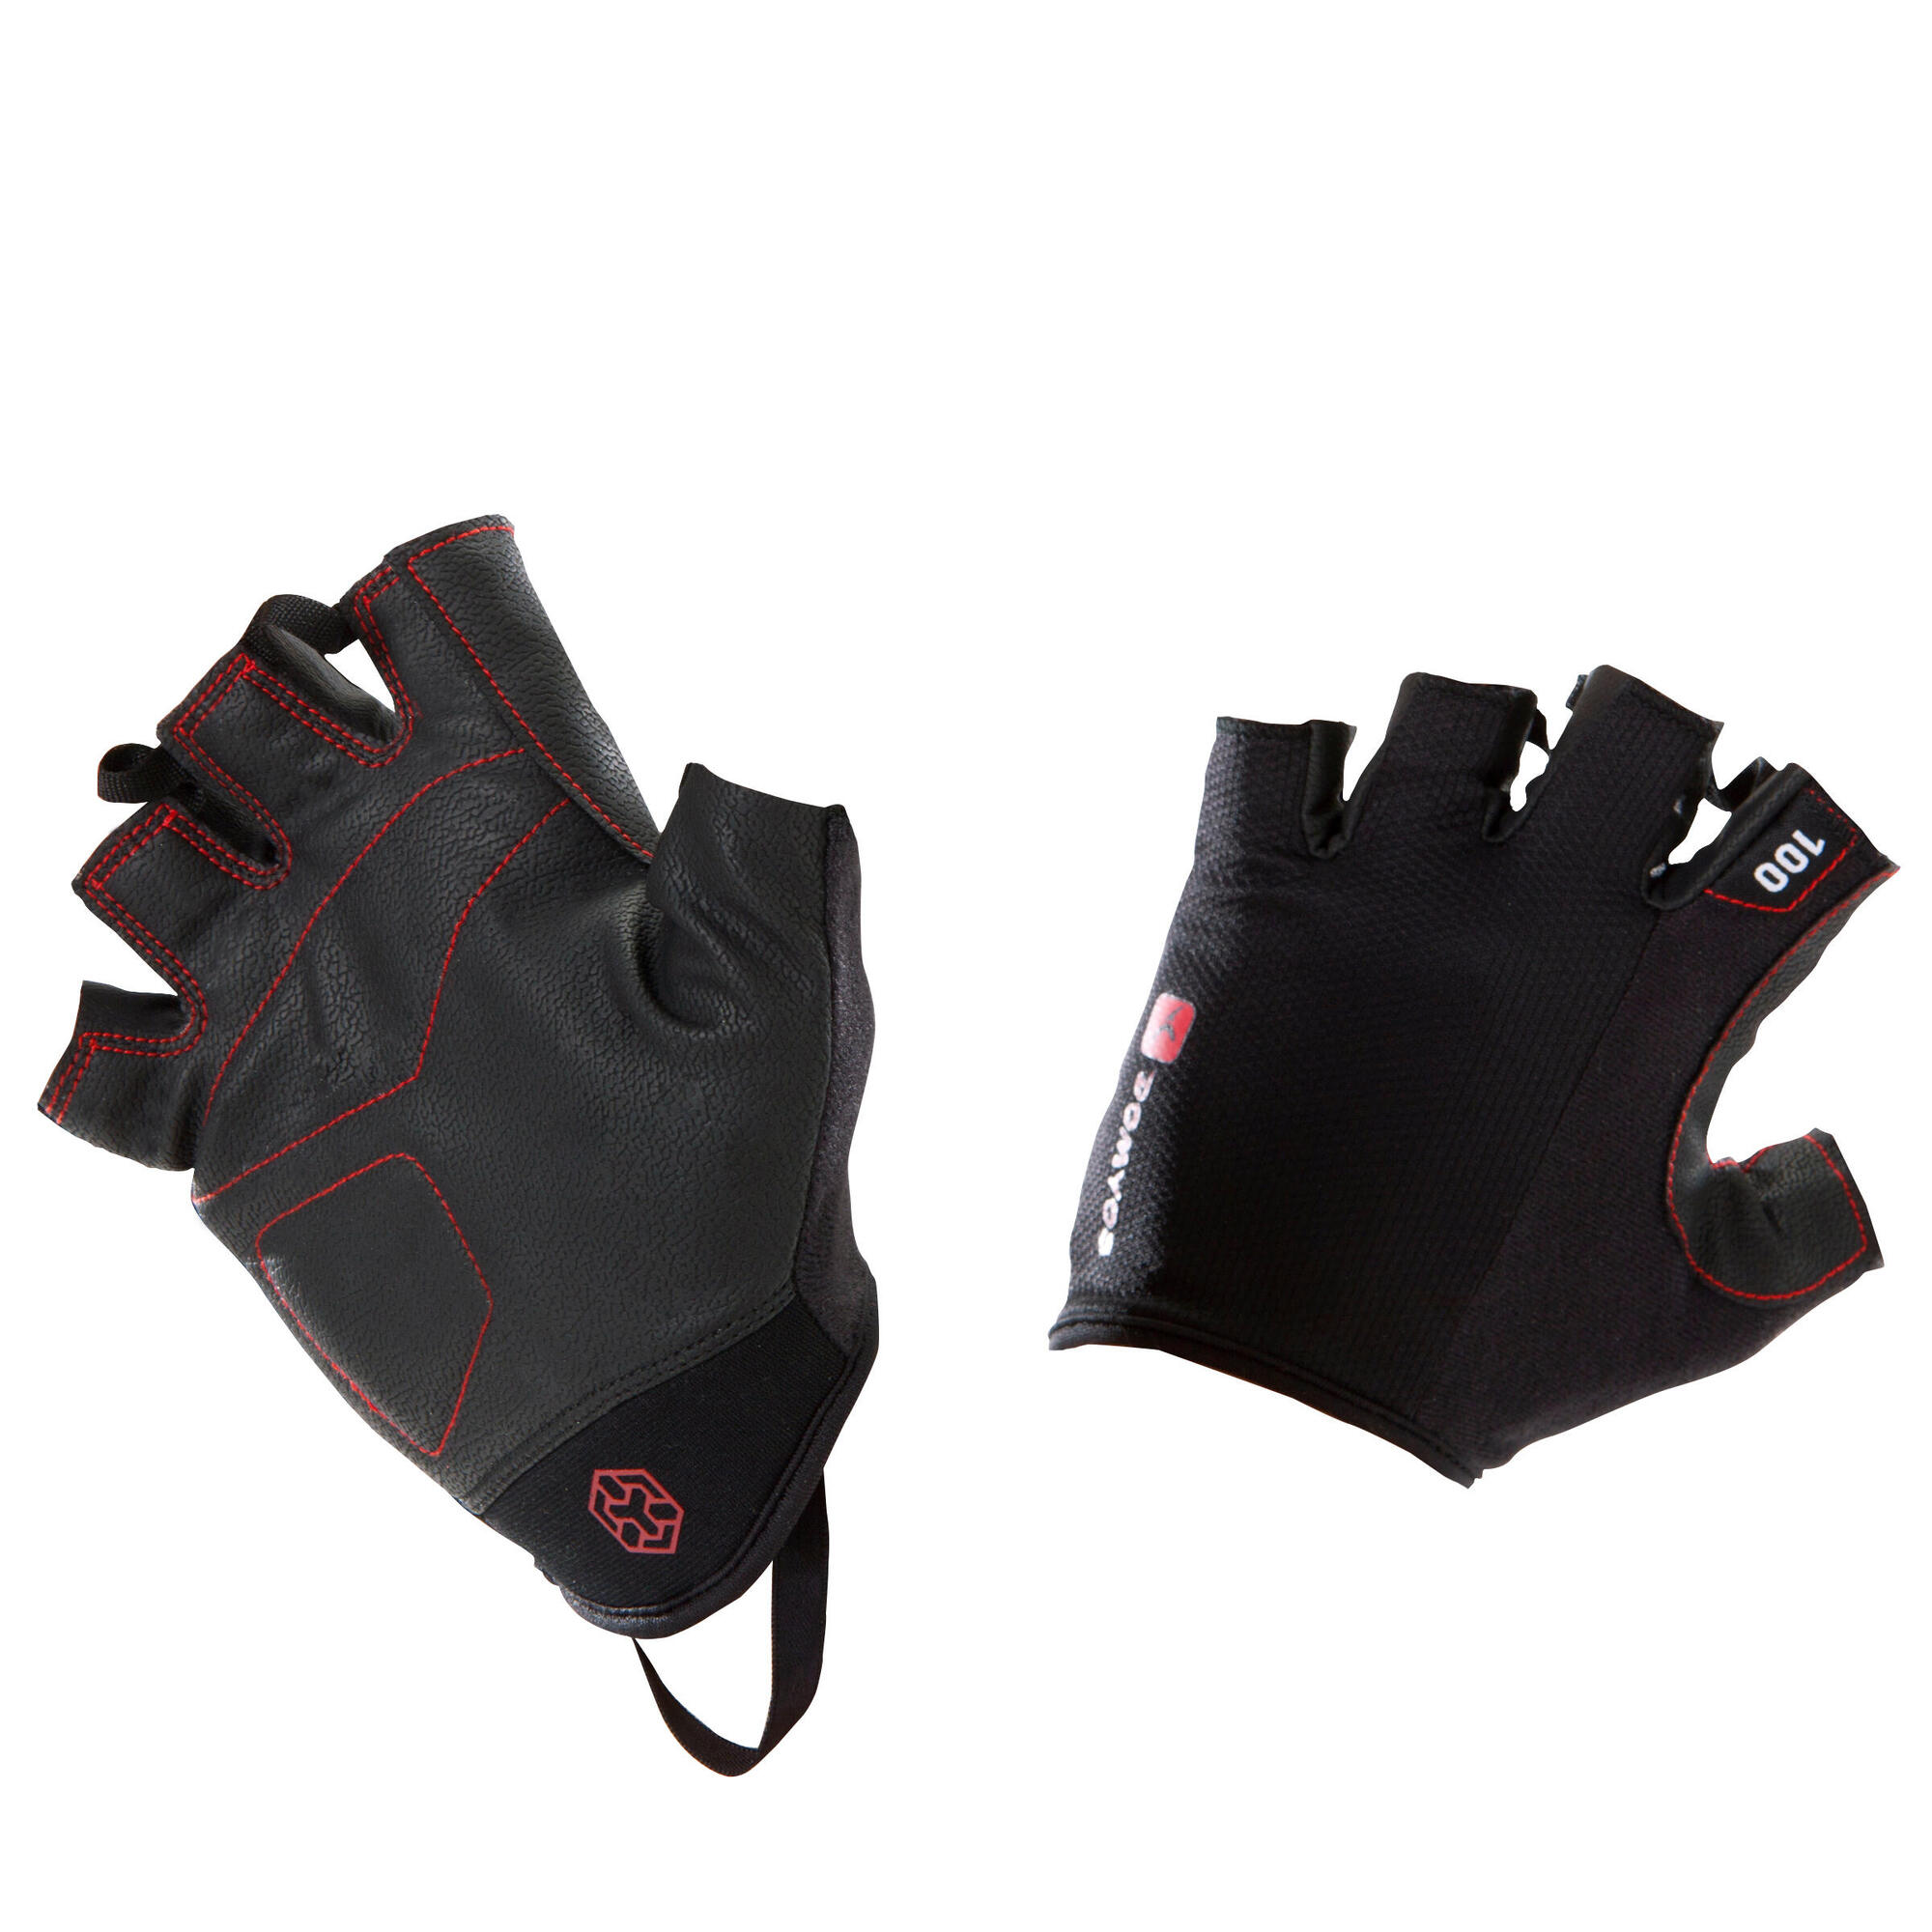 100 Weight Training Gloves - Black/Red | Domyos by Decathlon